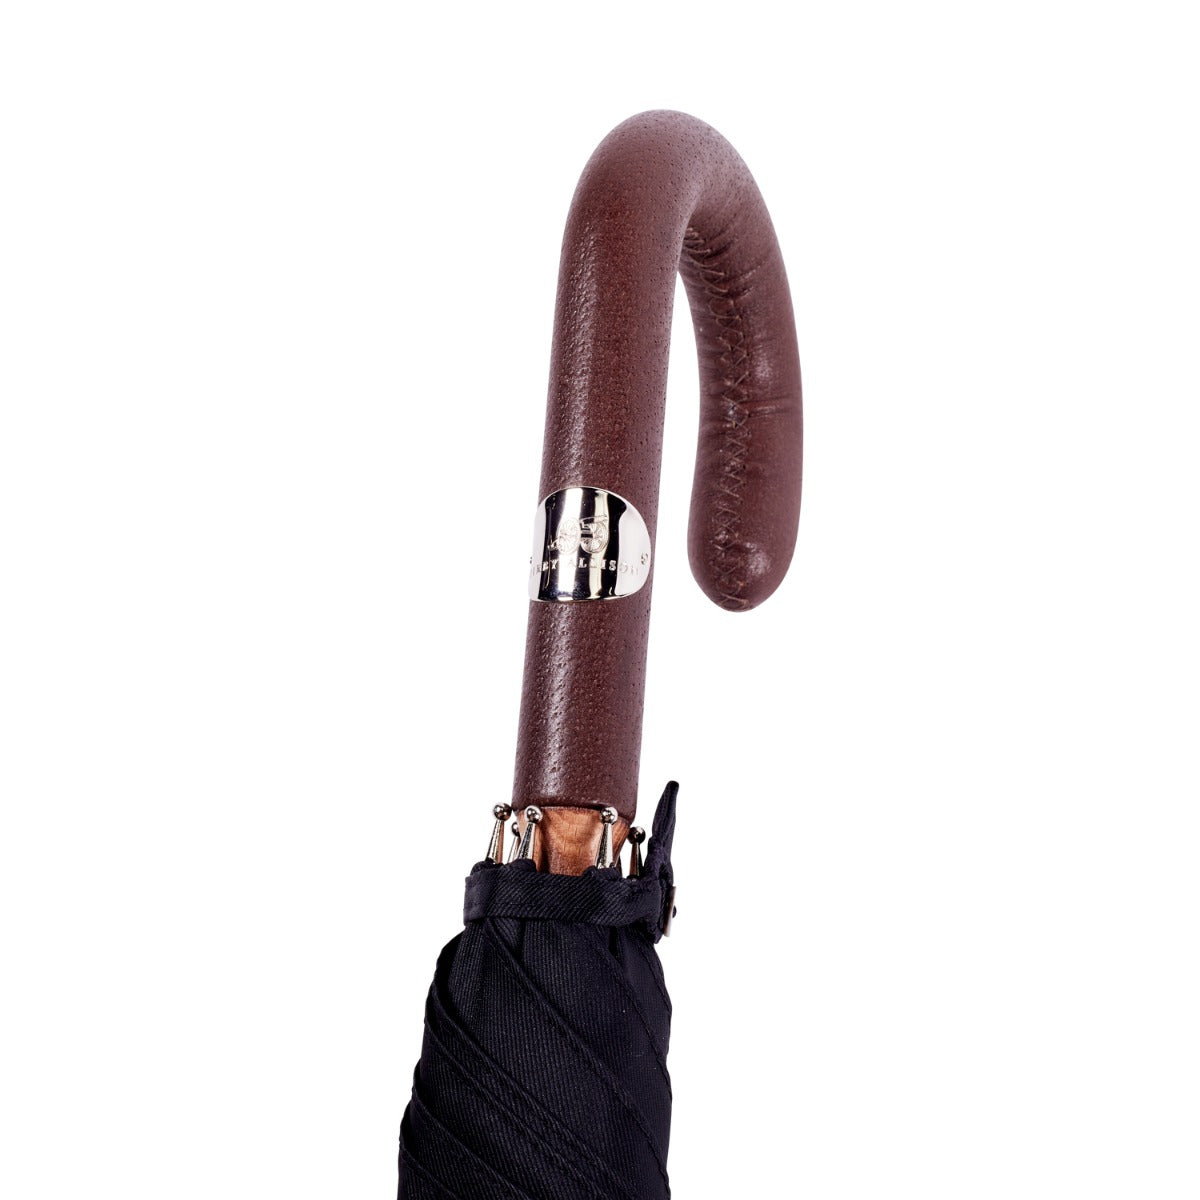 A Brown Pigskin Solid Stick Umbrella with Black Canopy with a KirbyAllison.com handle.